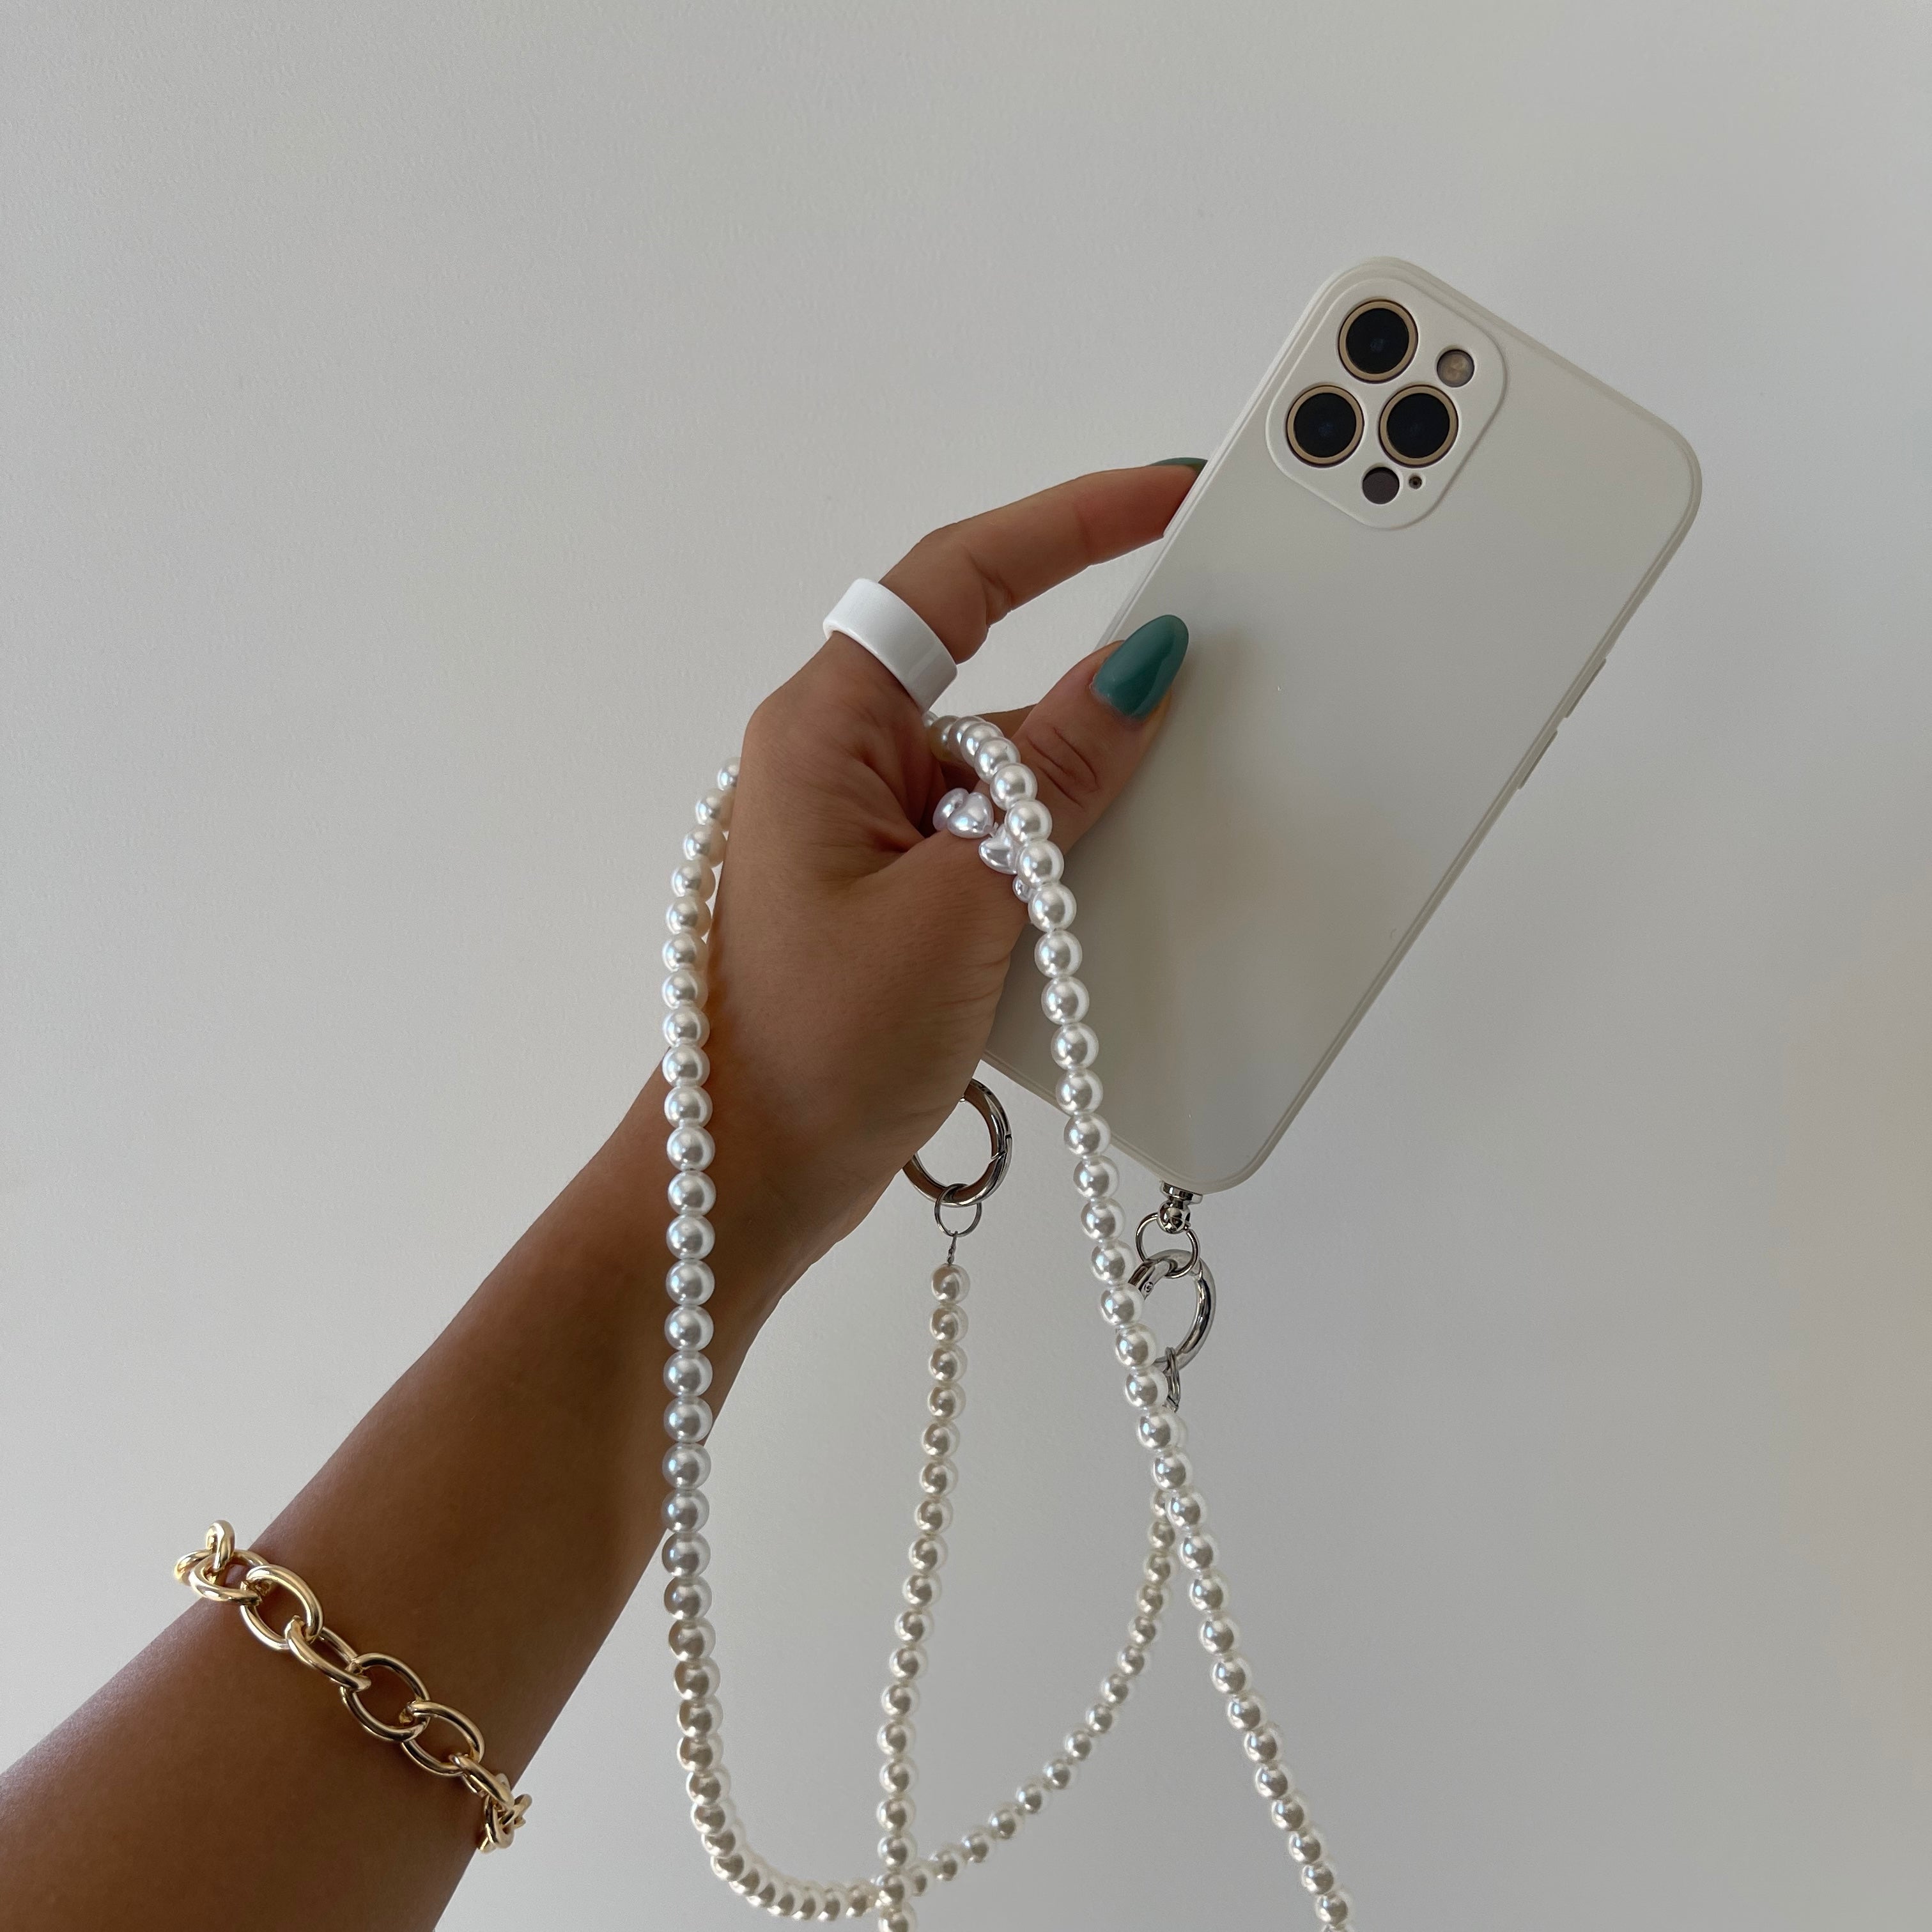 iPhone Case With Pearls Lanyard